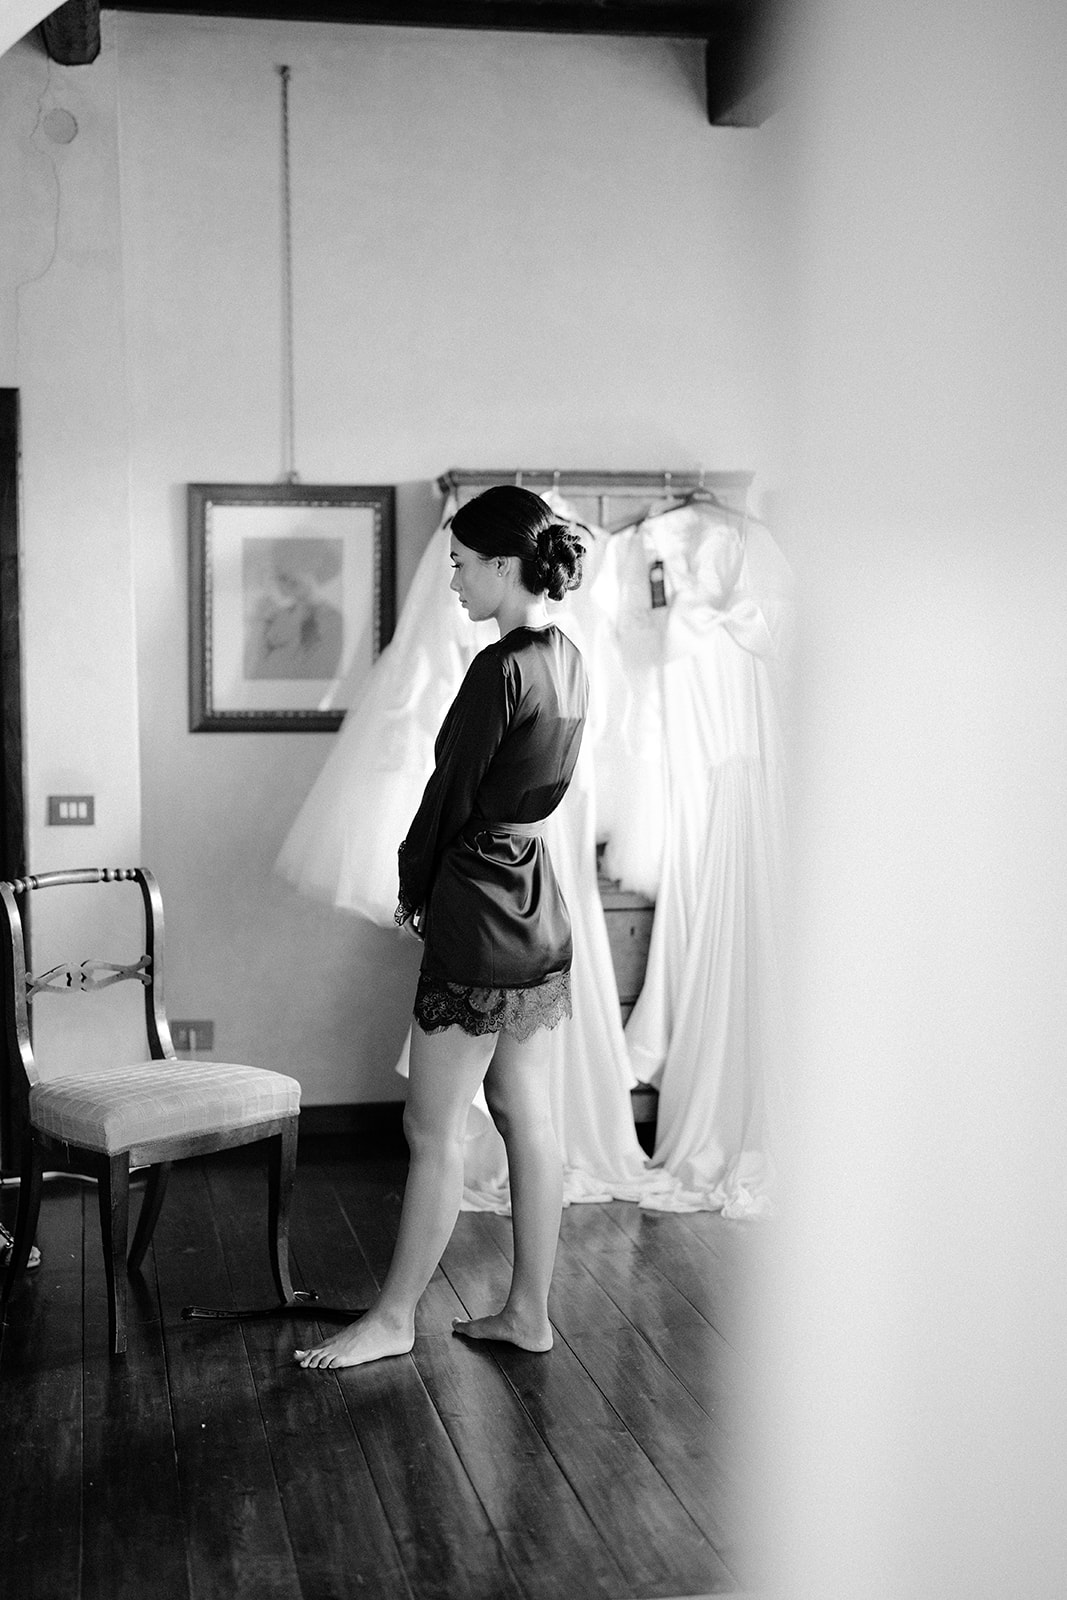 A bridesmaid waiting to get ready in the bride's room